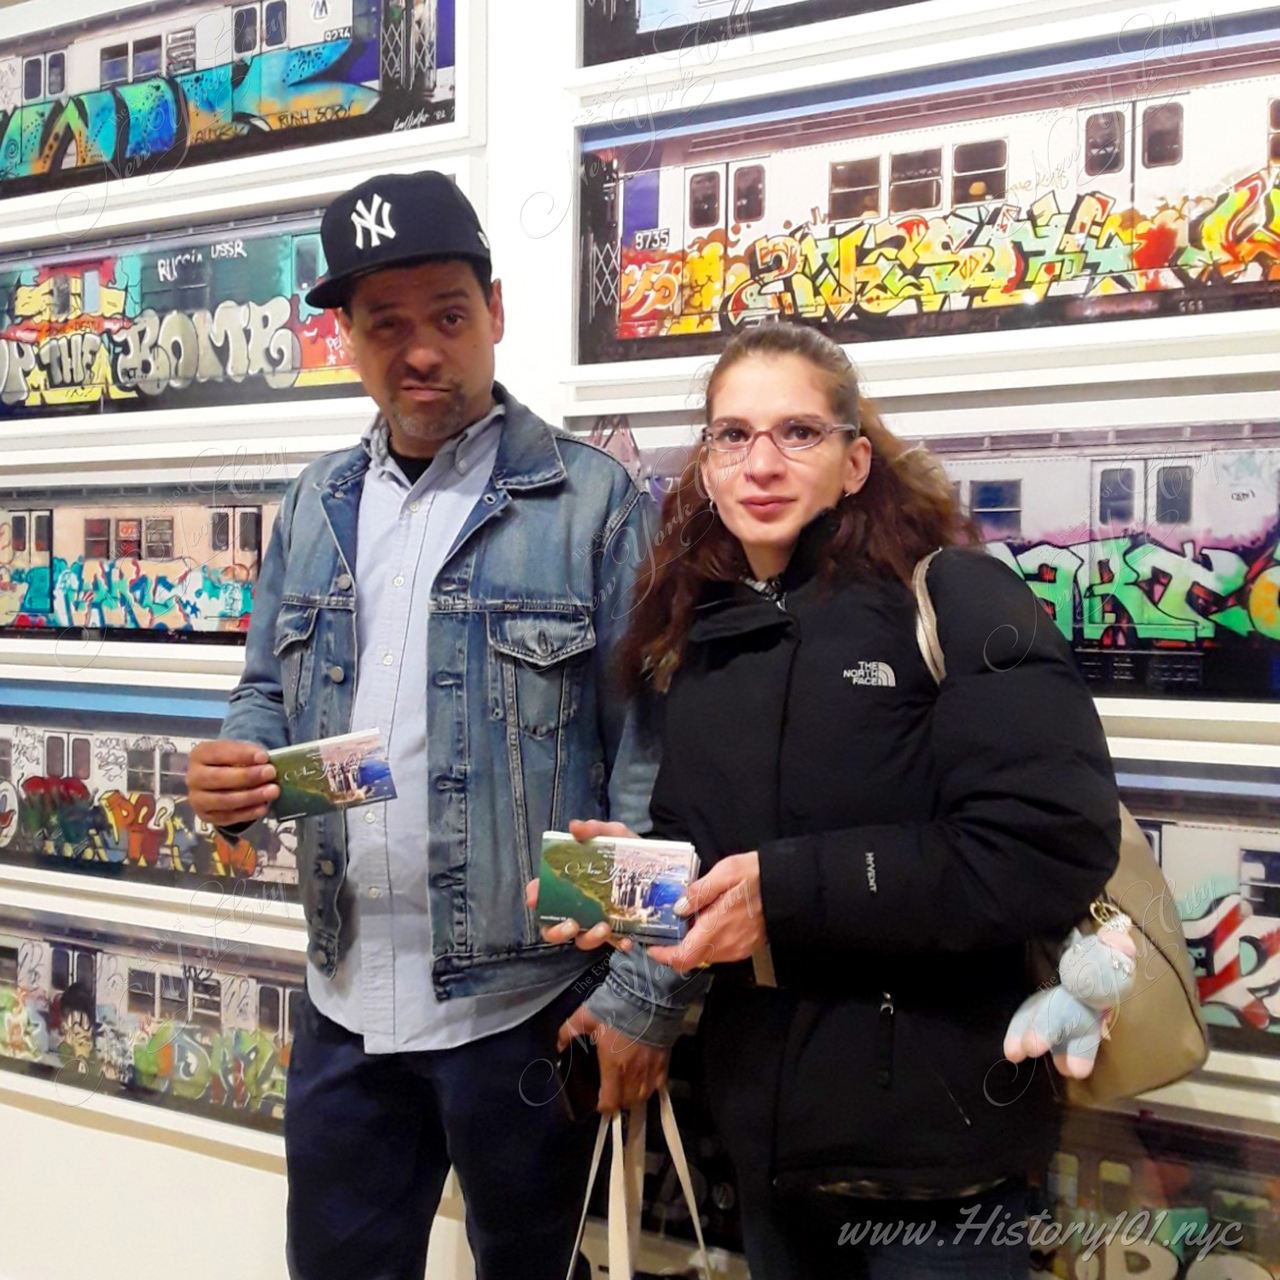 Henry Chalfant's Exhibit at The Bronx Museum: NYC's Graffiti Legacy #8